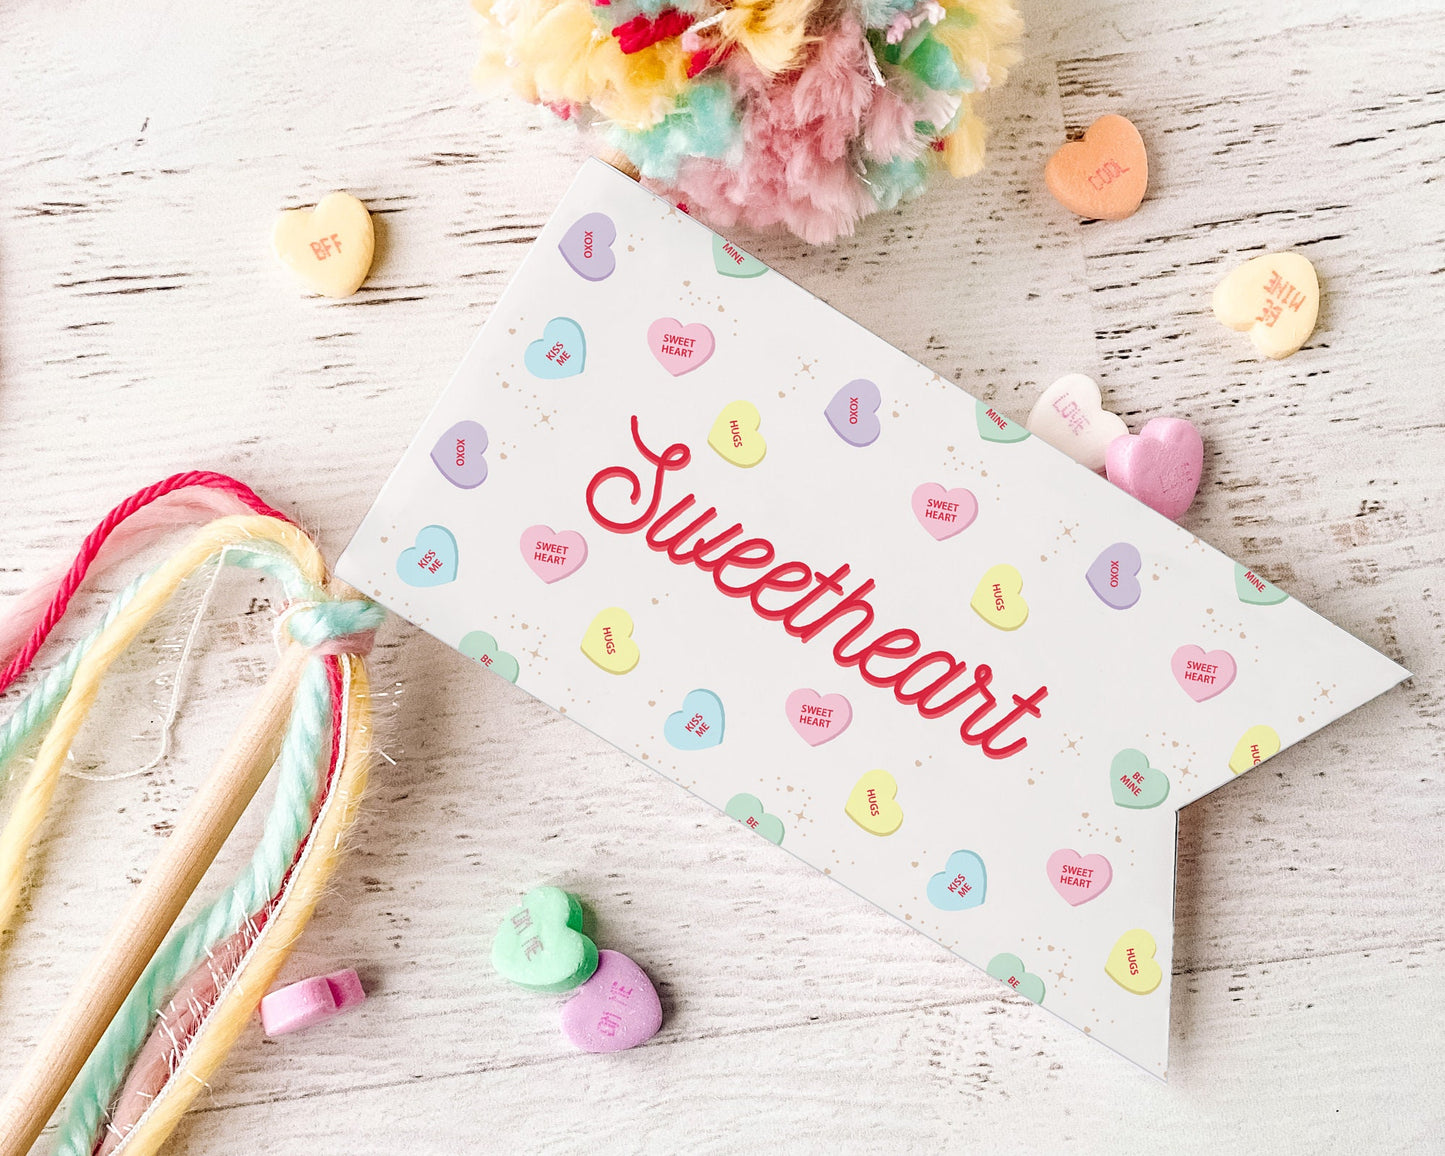 Conversation Hearts Valentine's Day Pennant Flag || Printable Sweetheart Valentine's Decor || Galentine's Day || Love Basket Wand || VD03